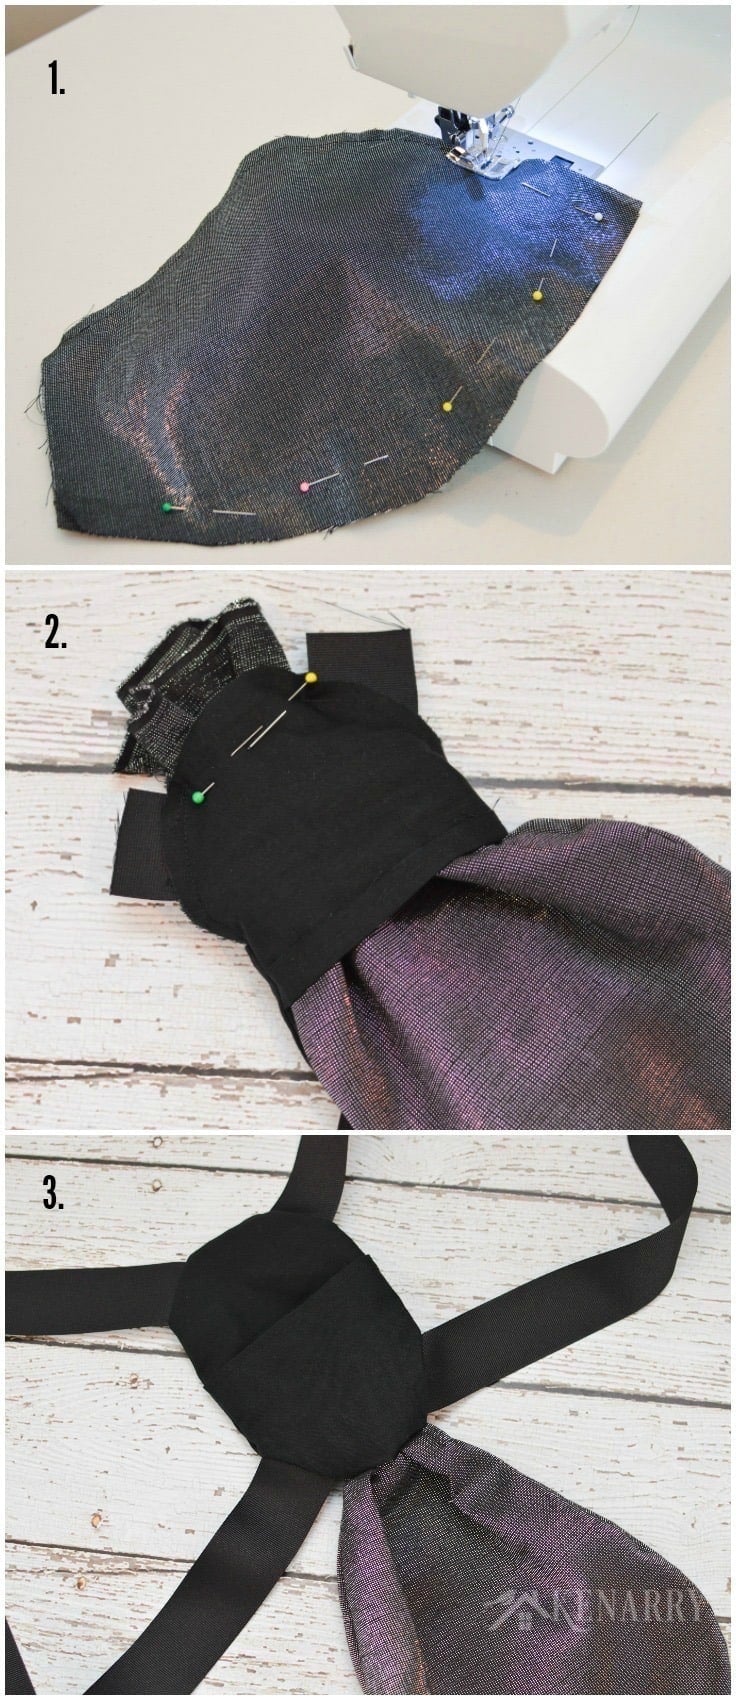 Sew an iridescent pouch to a black back pack to make DIY wings for a child's firefly costume for Halloween.